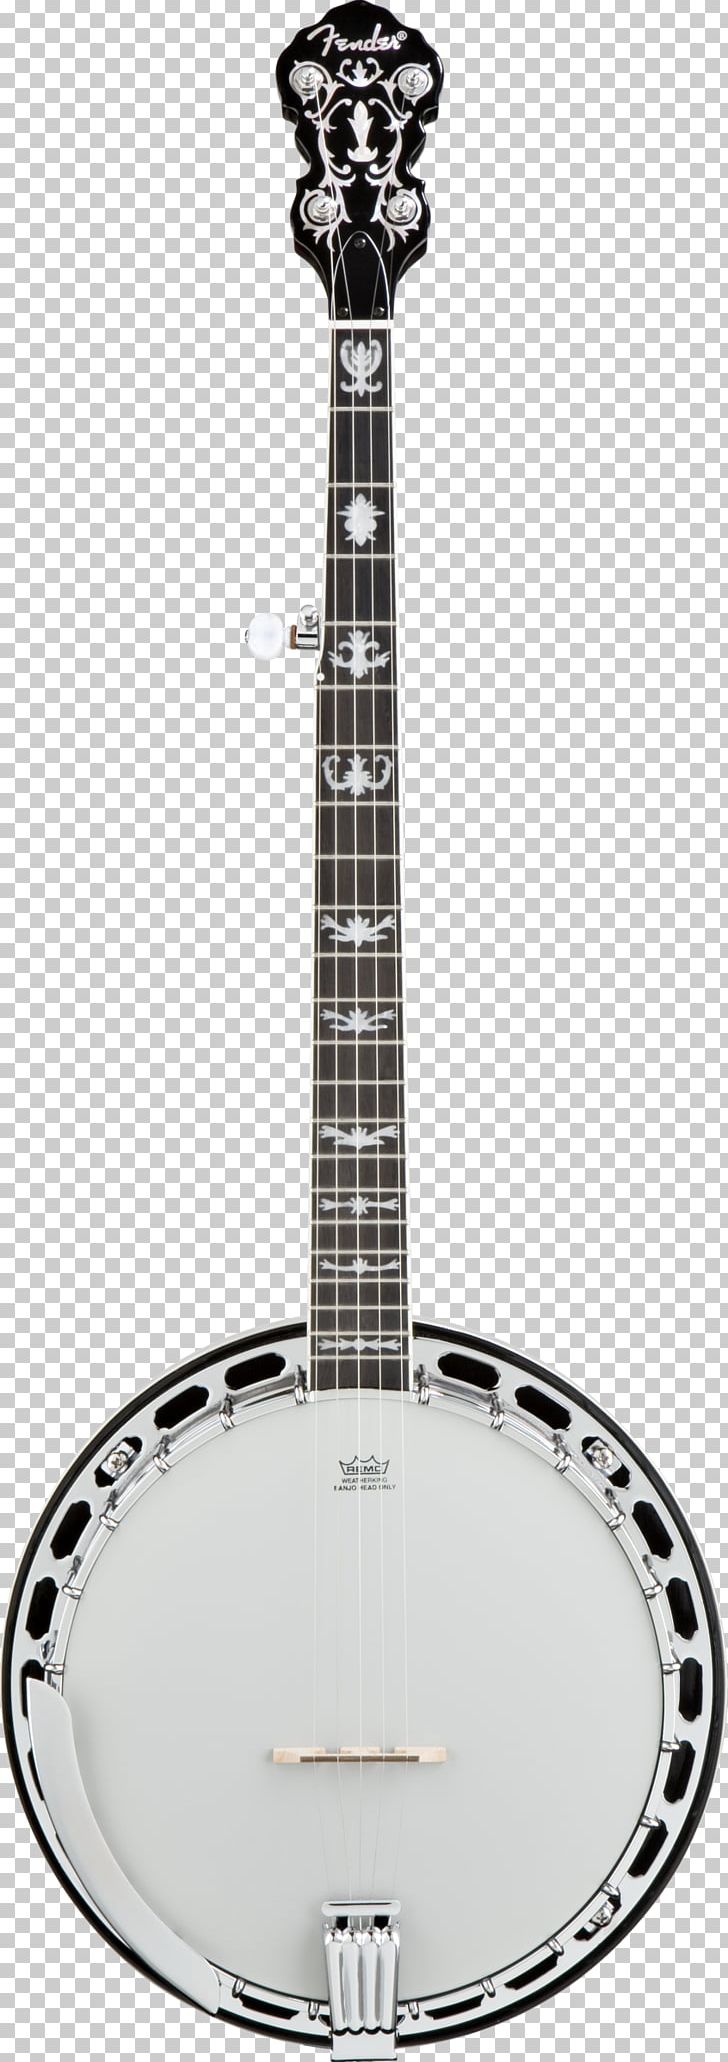 Ukulele Banjo Fender Musical Instruments Corporation Inlay PNG, Clipart, Acoustic Electric Guitar, Banjo Guitar, Banjo Uke, Bob Schmidt, Fender Free PNG Download